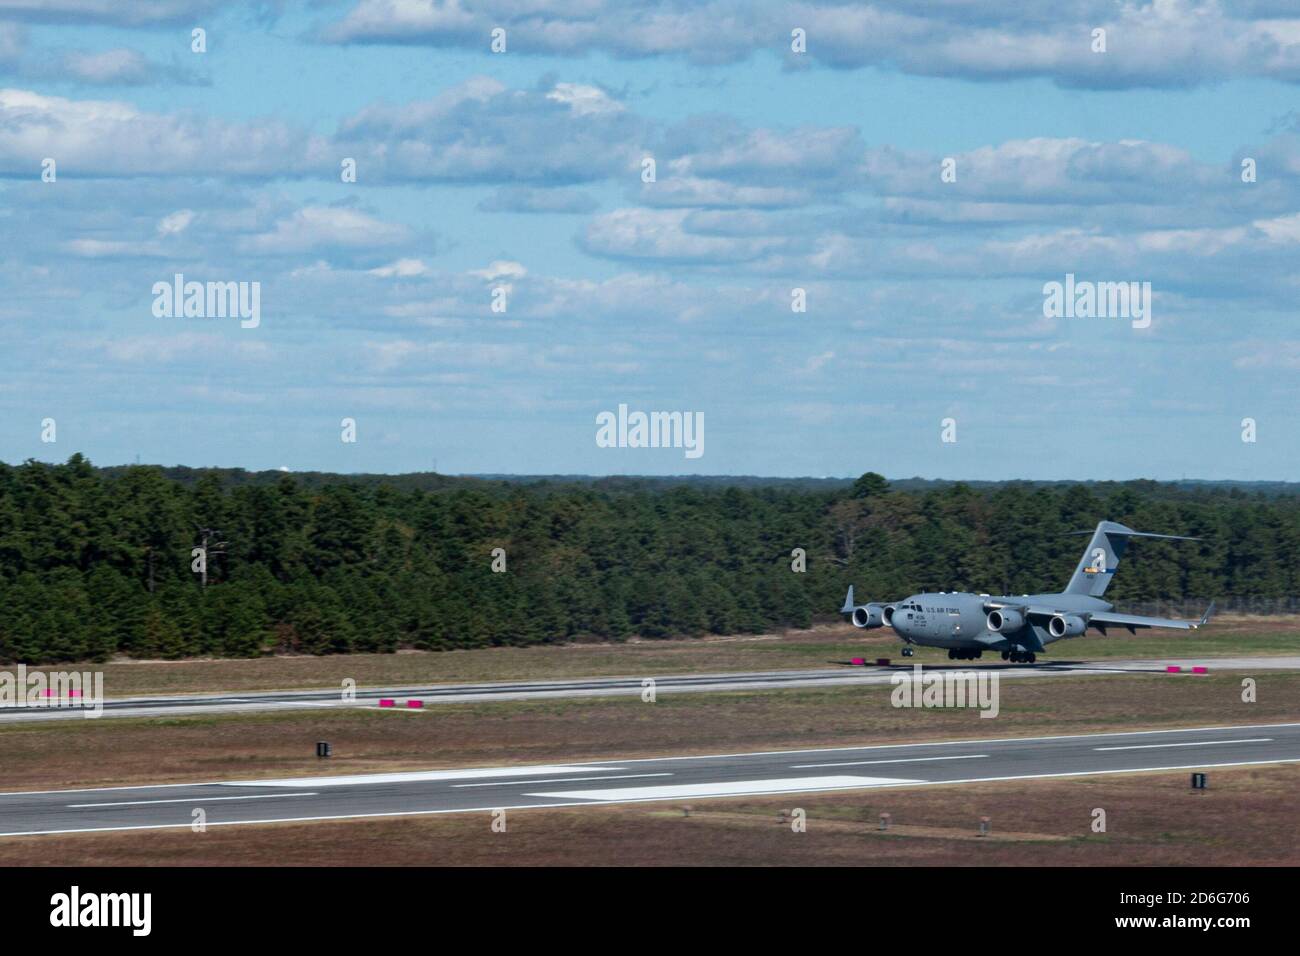 A C-17 Globemaster III lands at Joint Base McGuire-Dix-Lakehurst, N.J., Oct. 8, 2020. The Lakehurst assault landing zone is 3,500 ft. long and 90 ft. wide. It is used to replicate the experience of an assault landing and assesses pilots’ precise flying, planning and general knowledge of the strategic maneuver. (U.S. Air Force Airman 1st Class Azaria E. Foster) Stock Photo